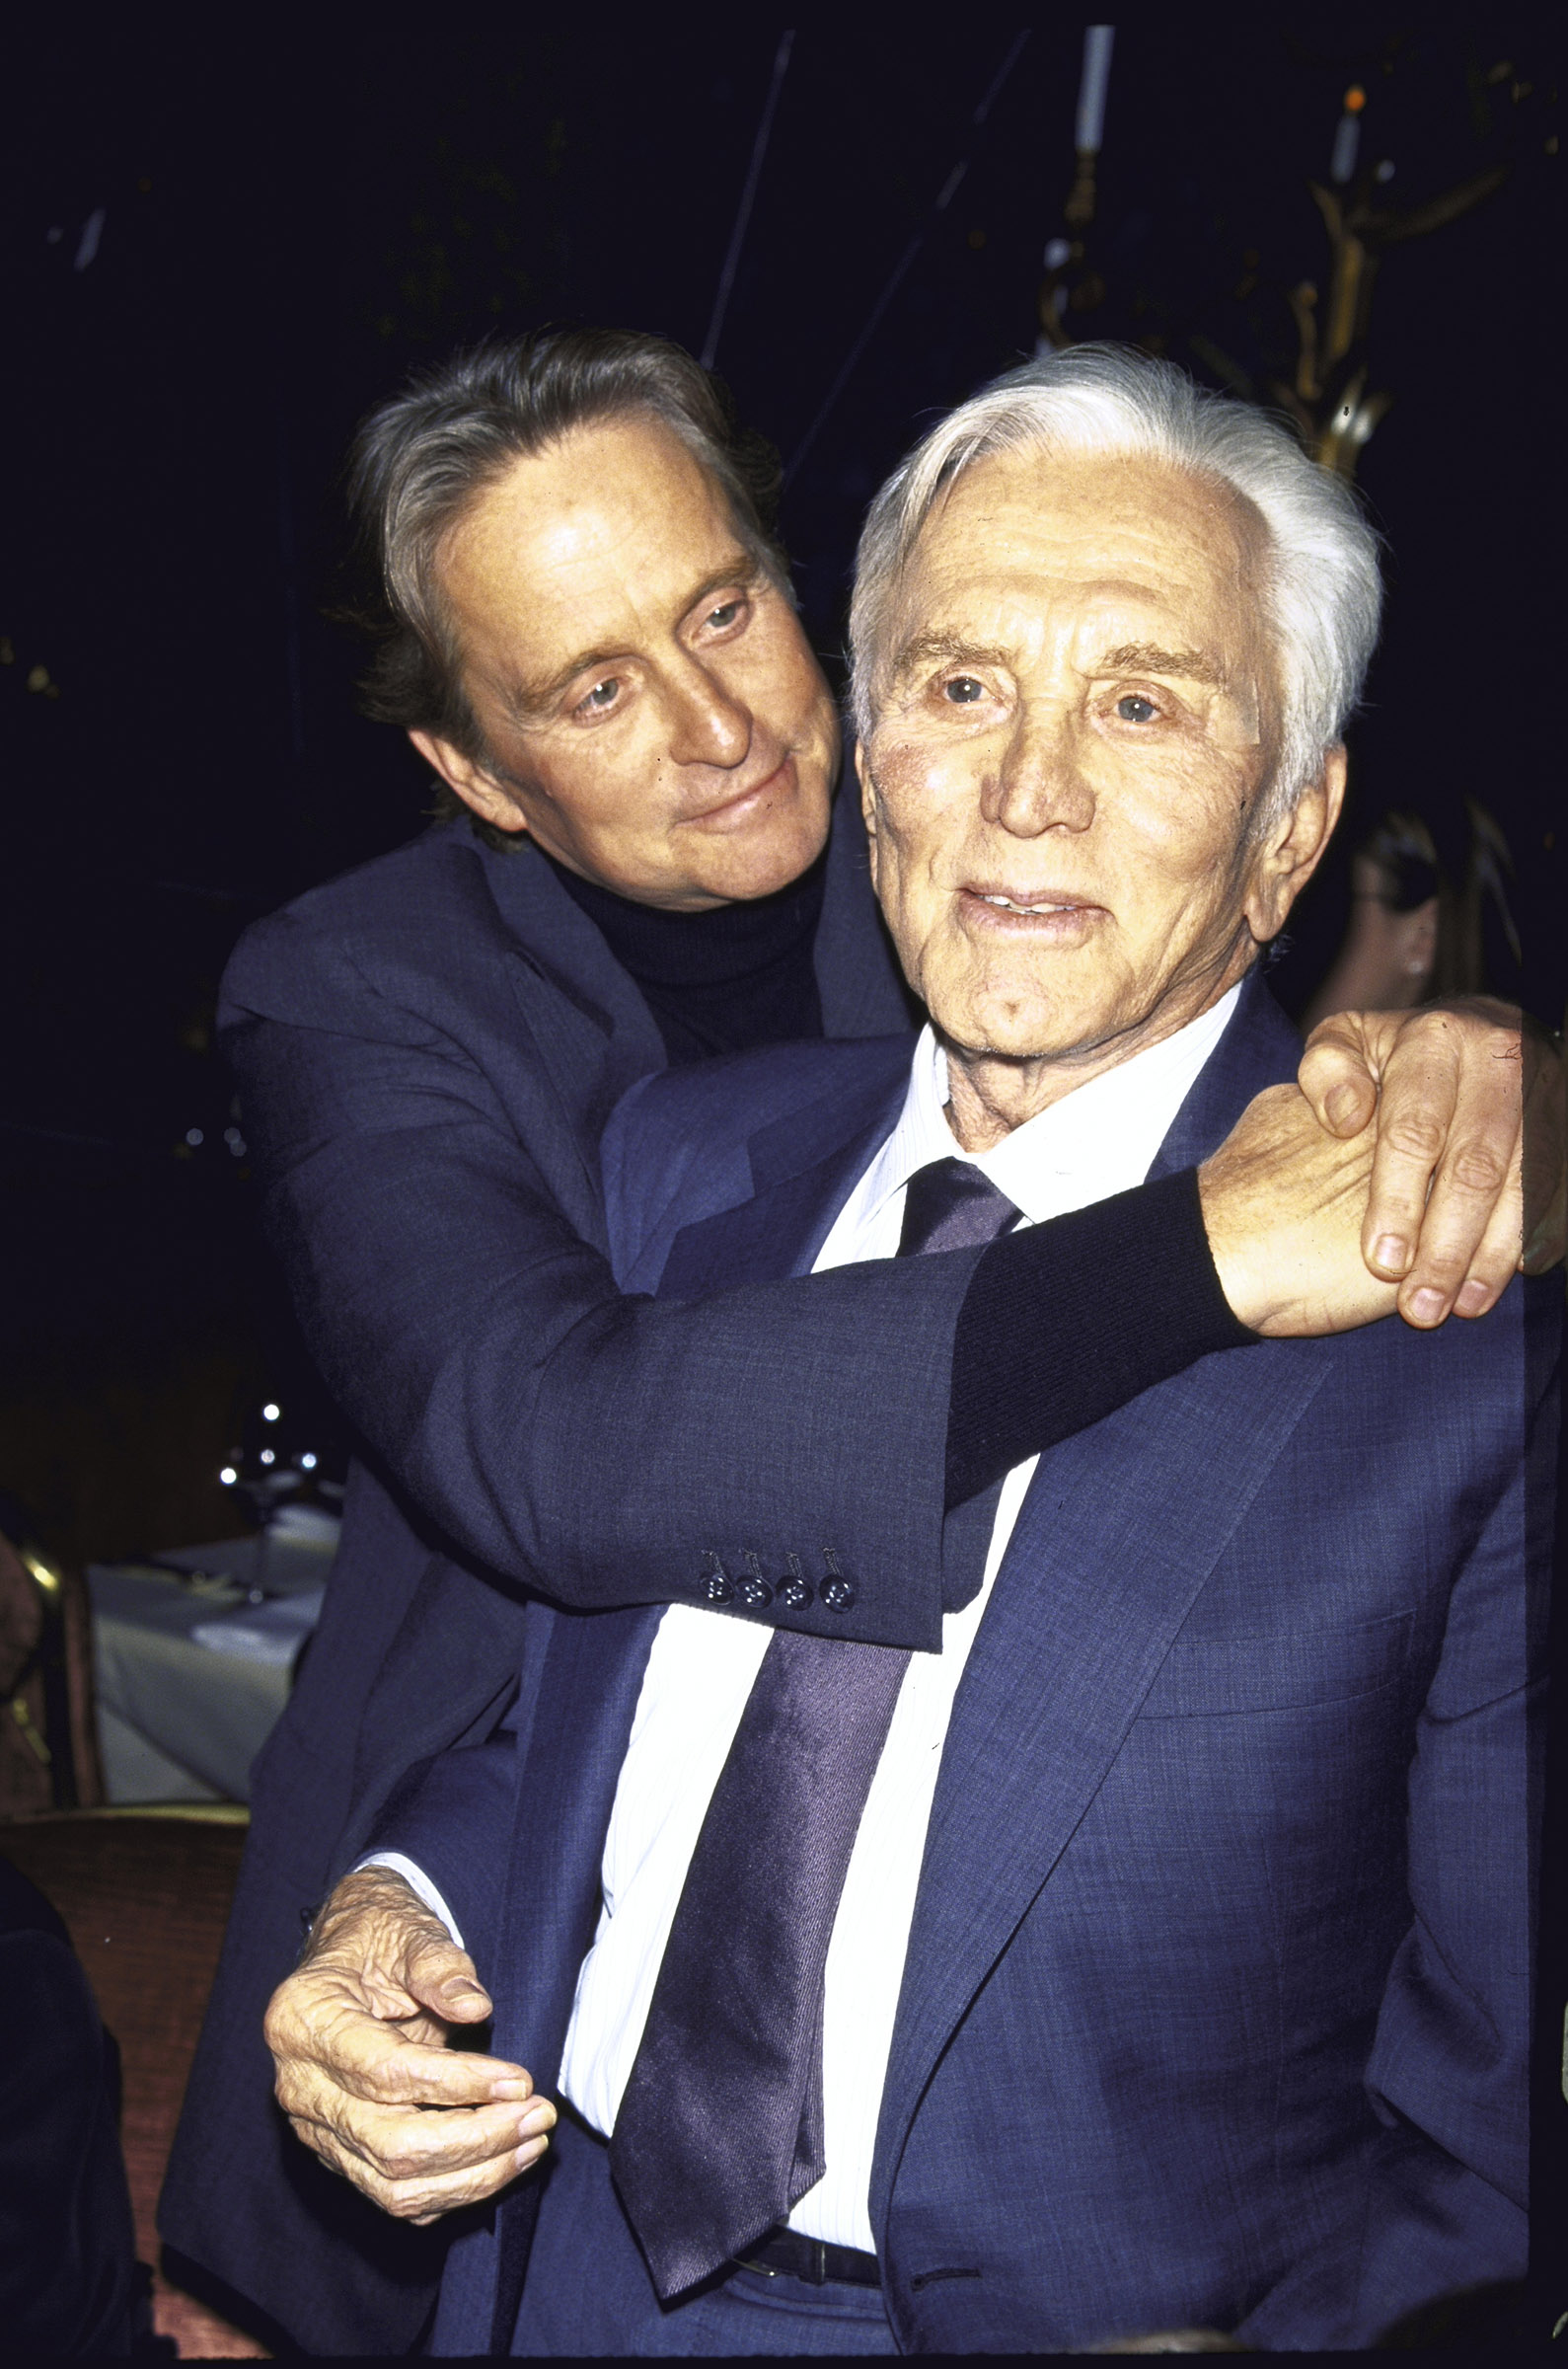 (L-R) Actor Michael Douglas and his father, actor Kirk Douglas, at a film premiere of Kirk's Diamonds in December 1999. (Dave Allocca—The LIFE Picture Collection via Getty Images)